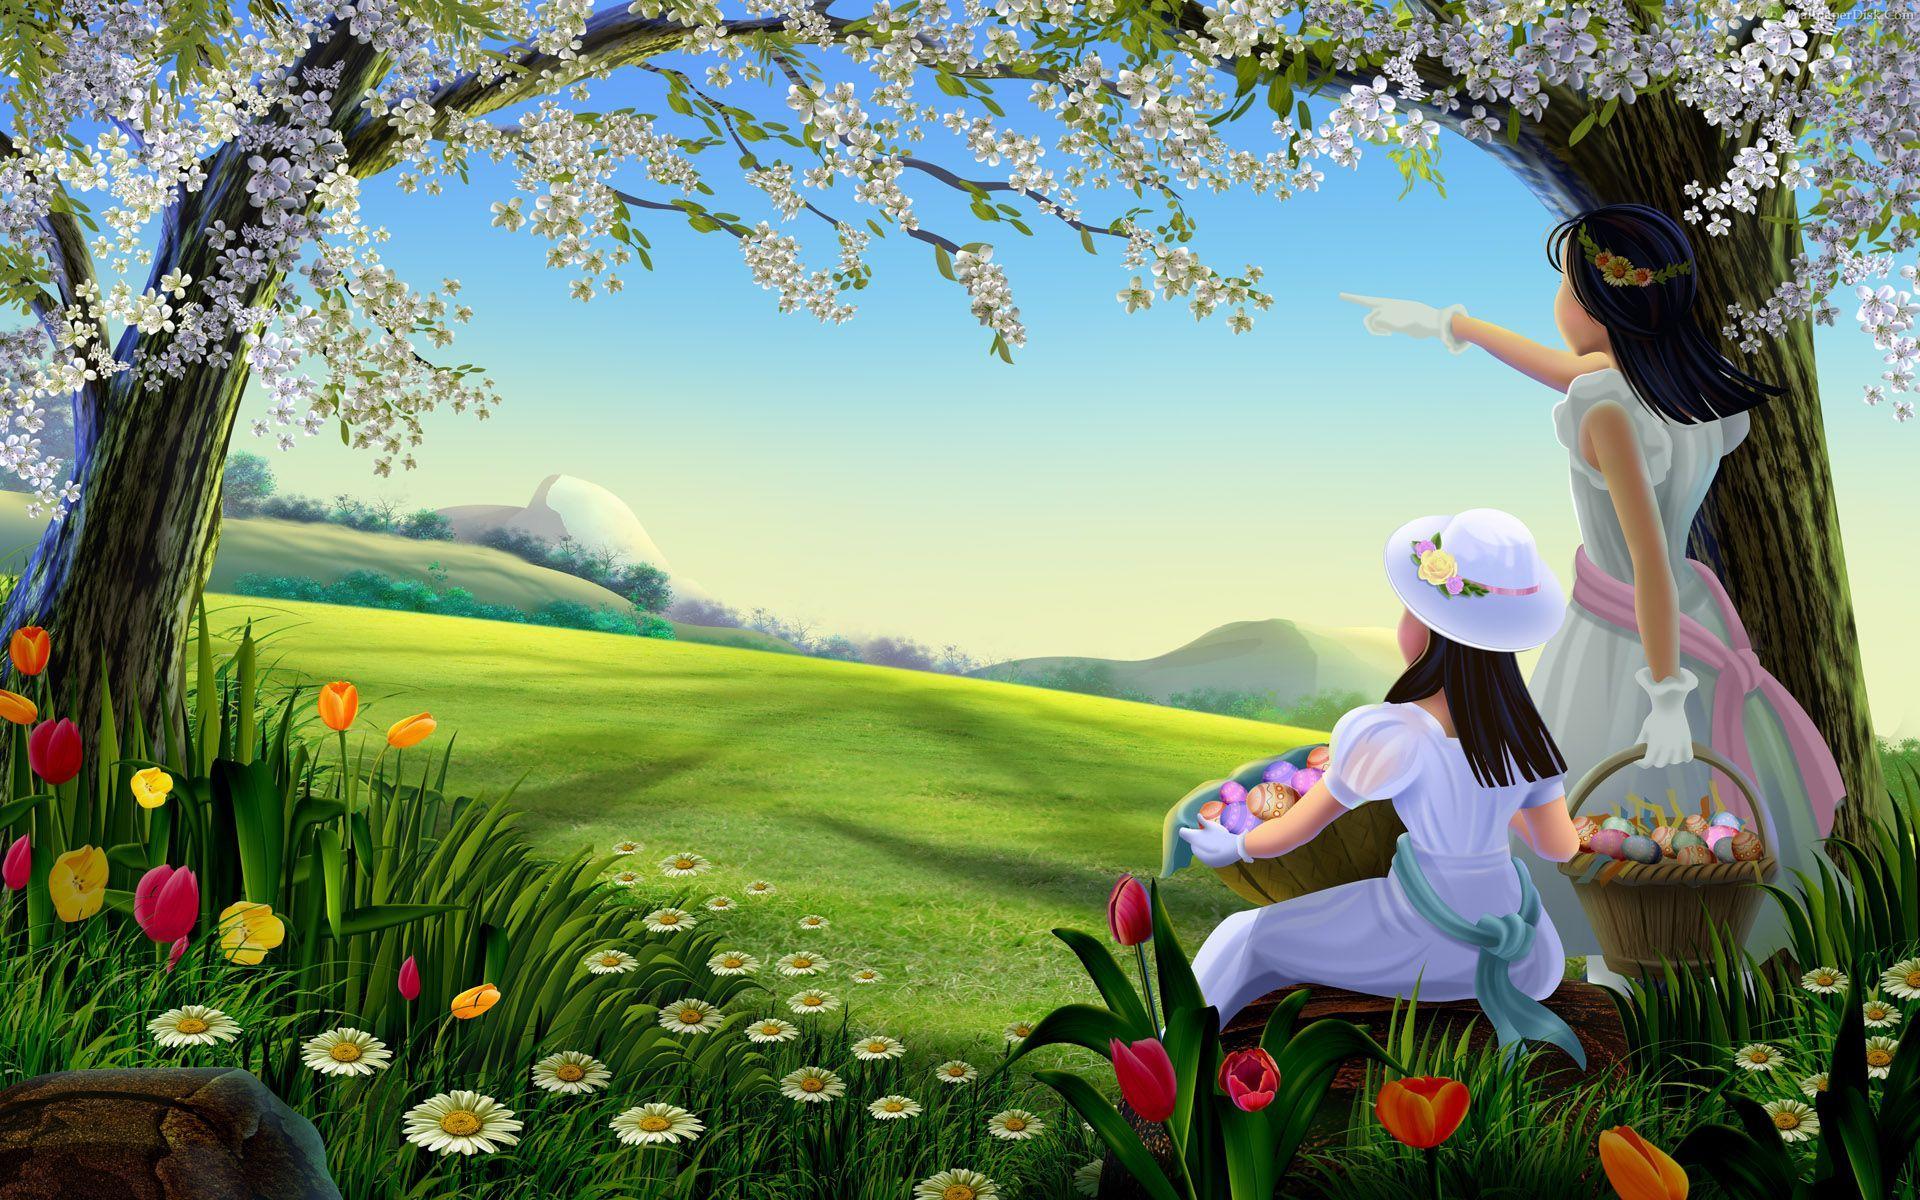 Spring Weather Wallpapers Top Free Spring Weather Backgrounds